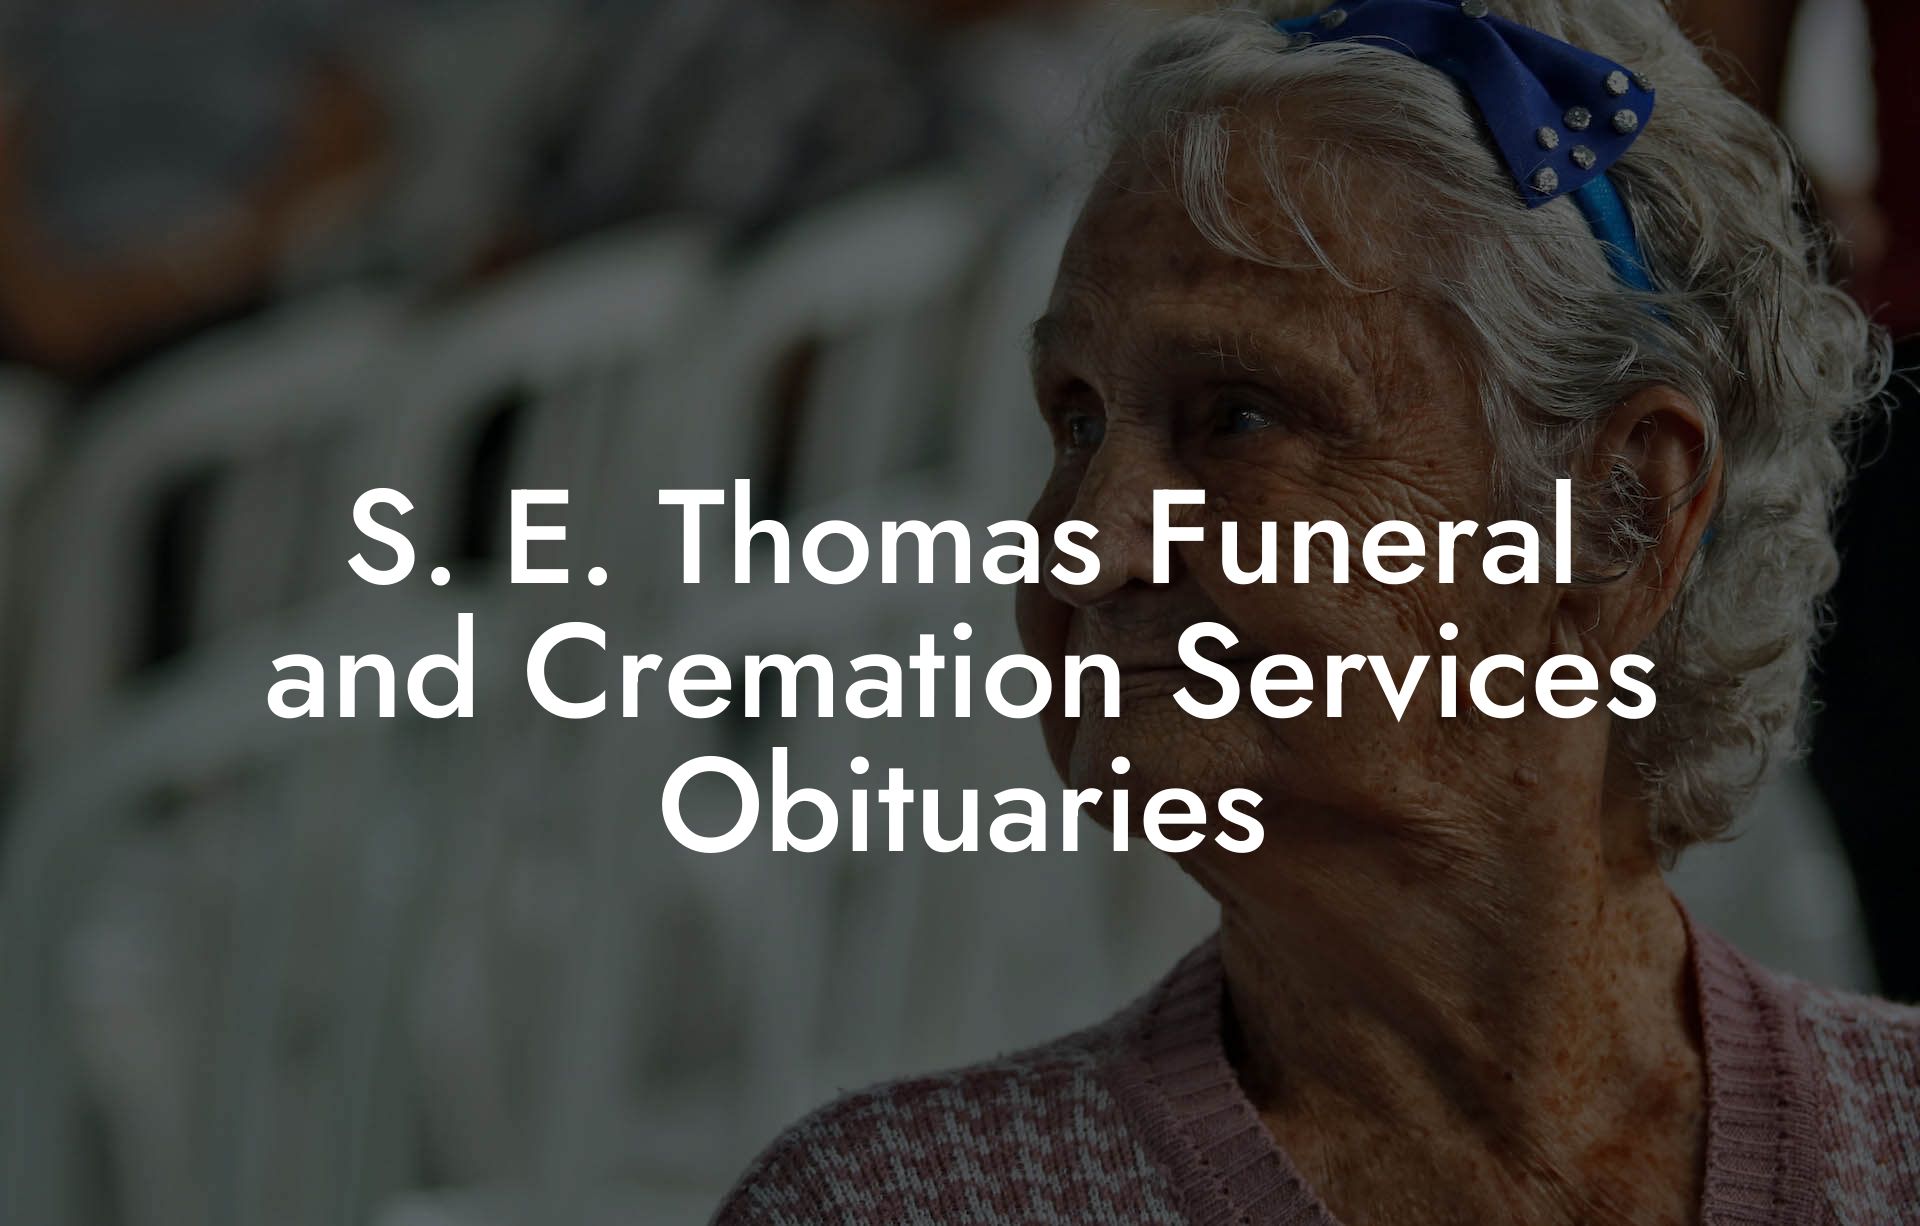 S. E. Thomas Funeral and Cremation Services Obituaries